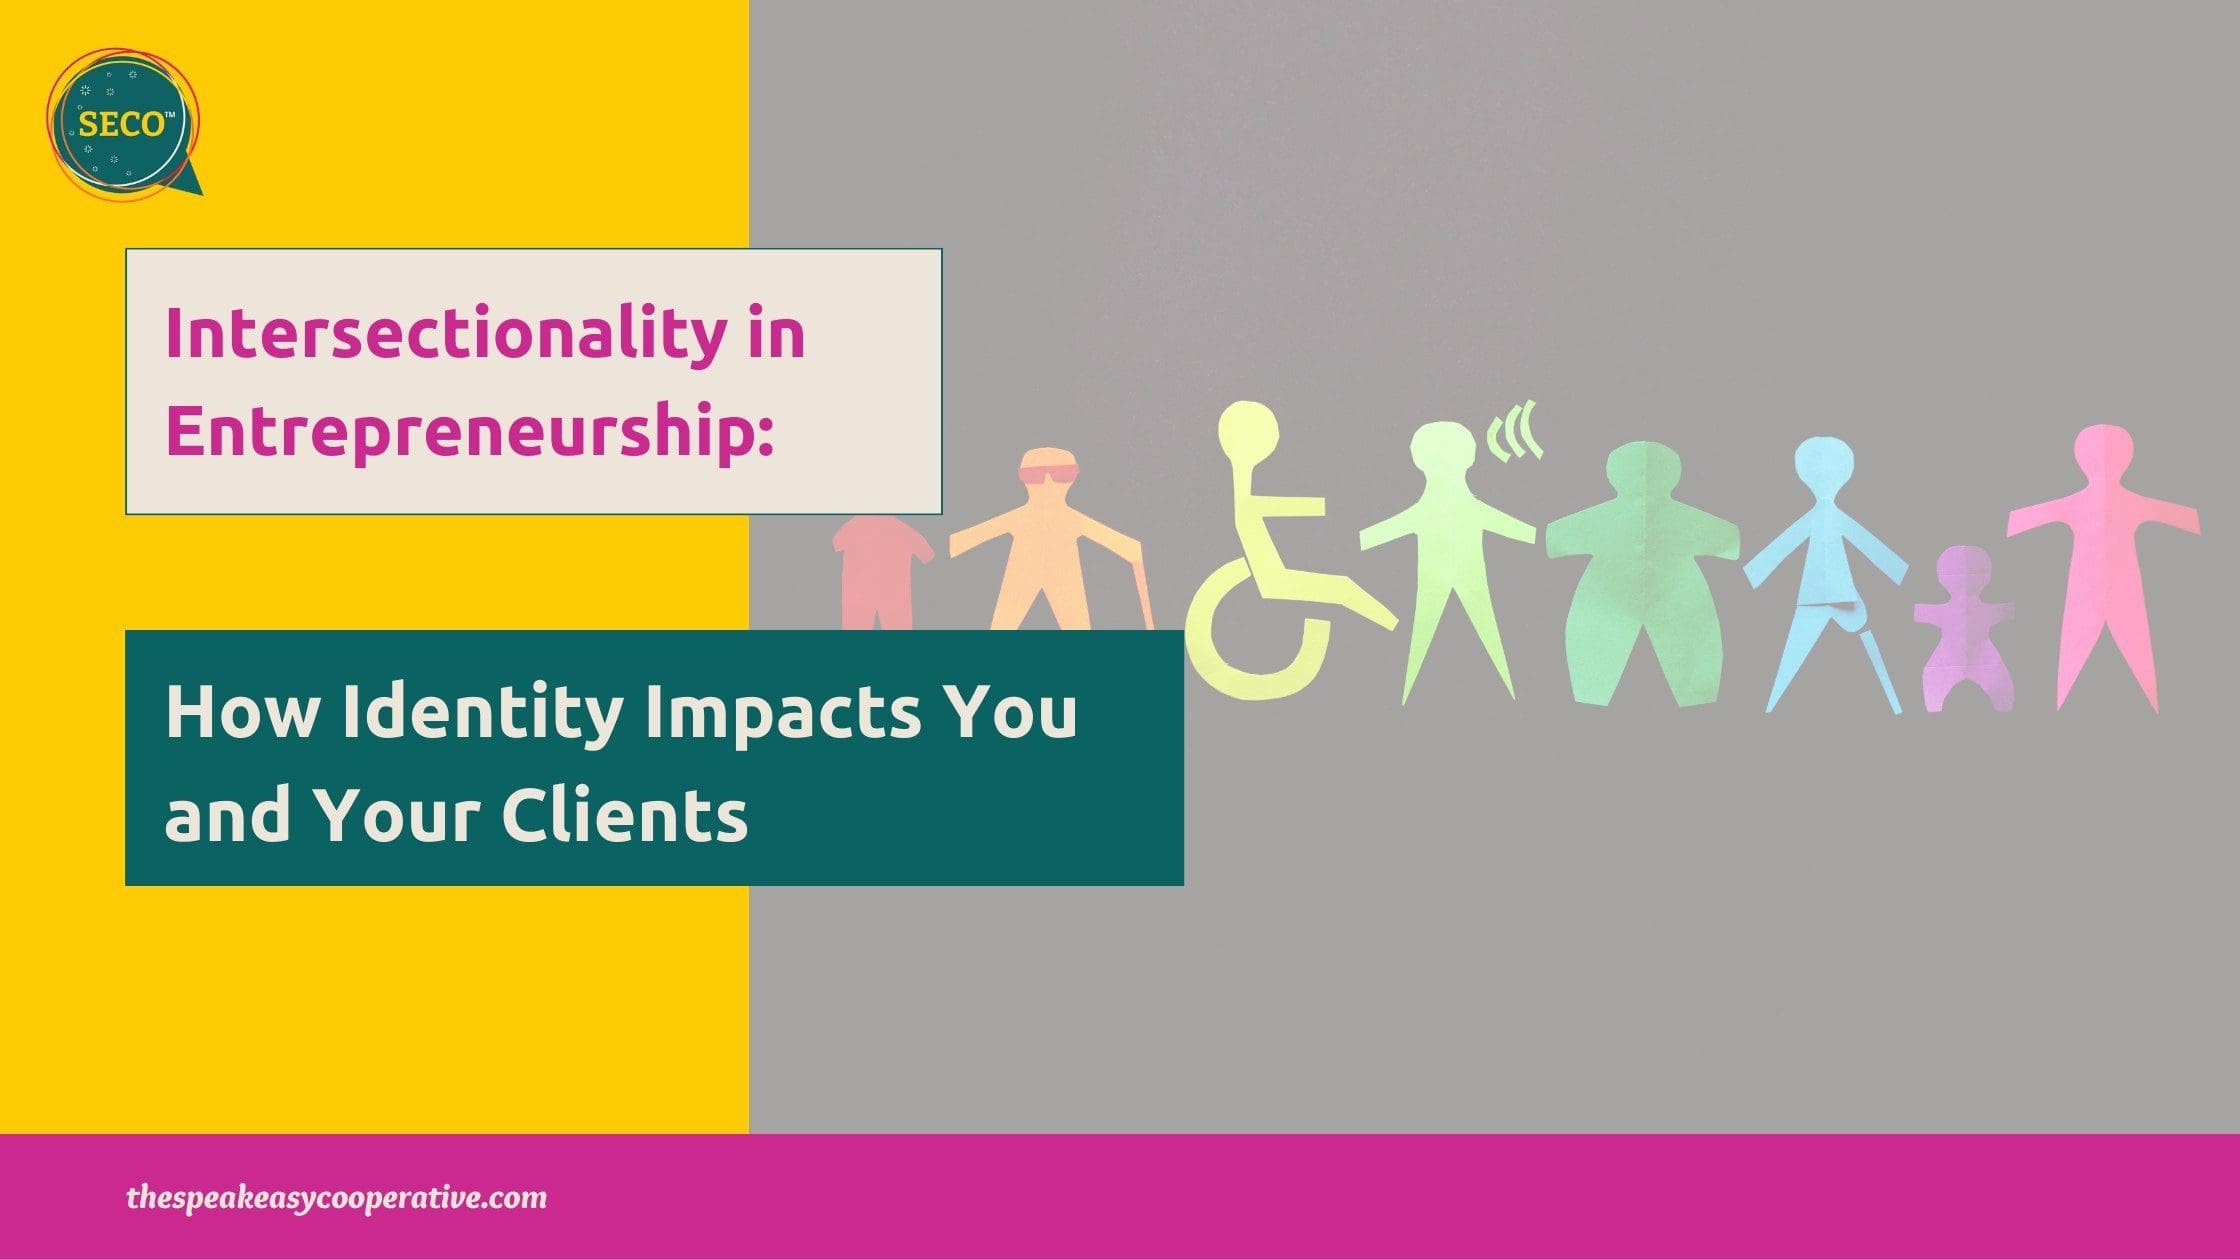 Intersectionality in Entrepreneurship - How identity impacts business. A colorful drawing resembling humans of different shapes, colors, sizes and abilities.